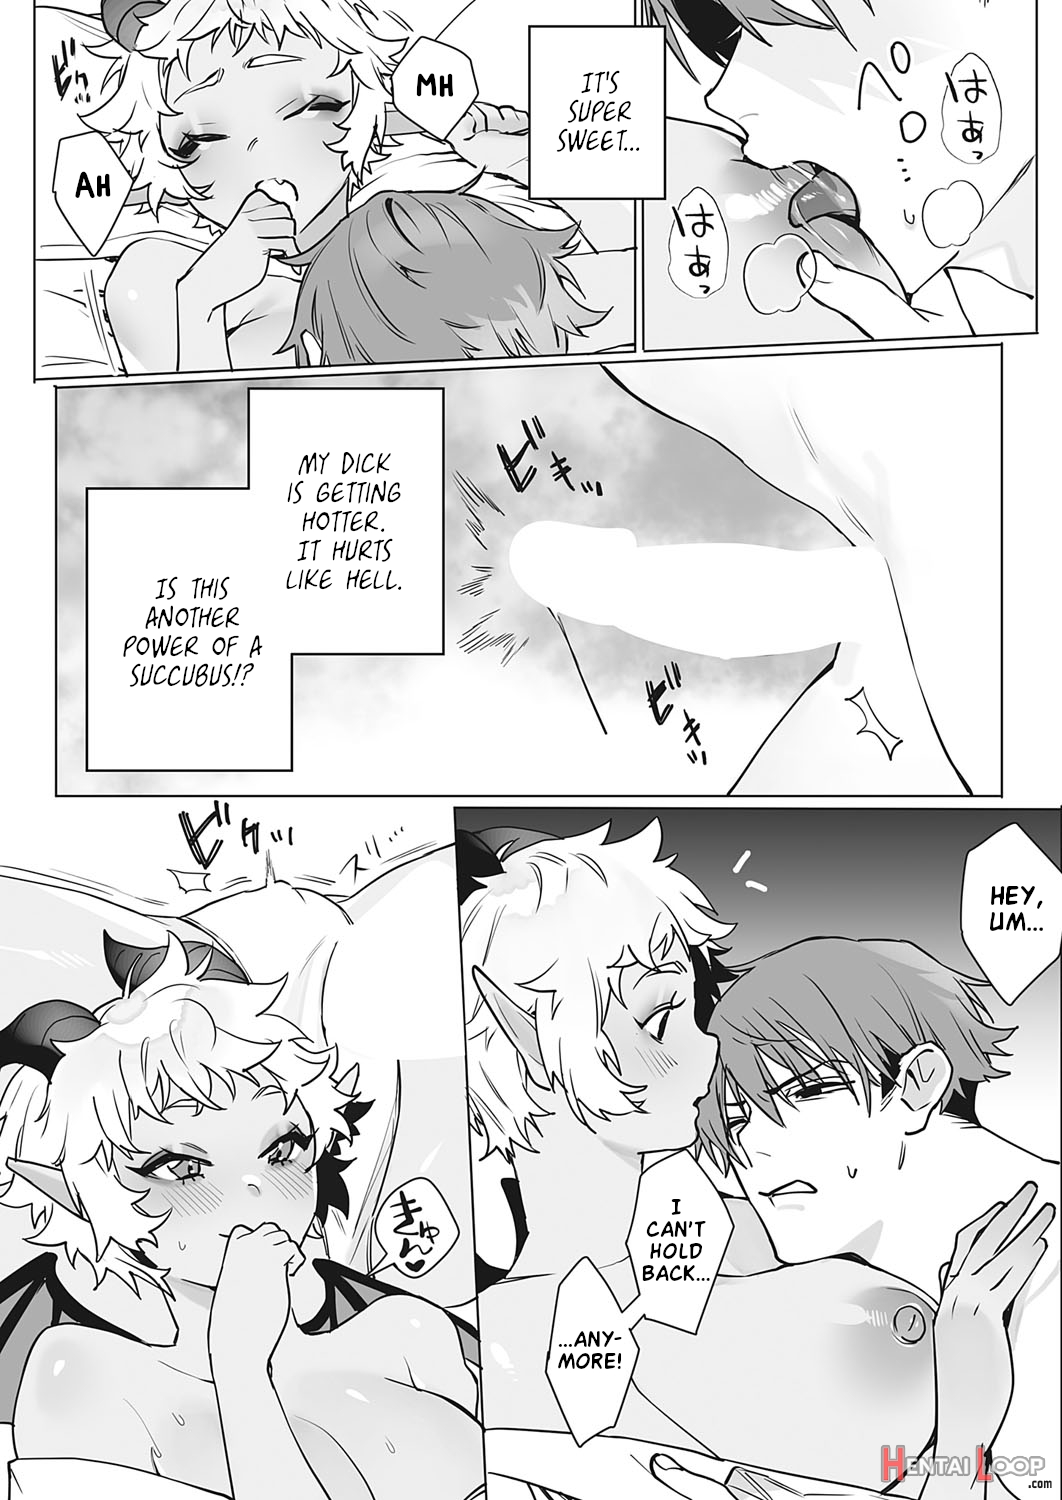 A Dance With Komugi-chan The Succubus page 11